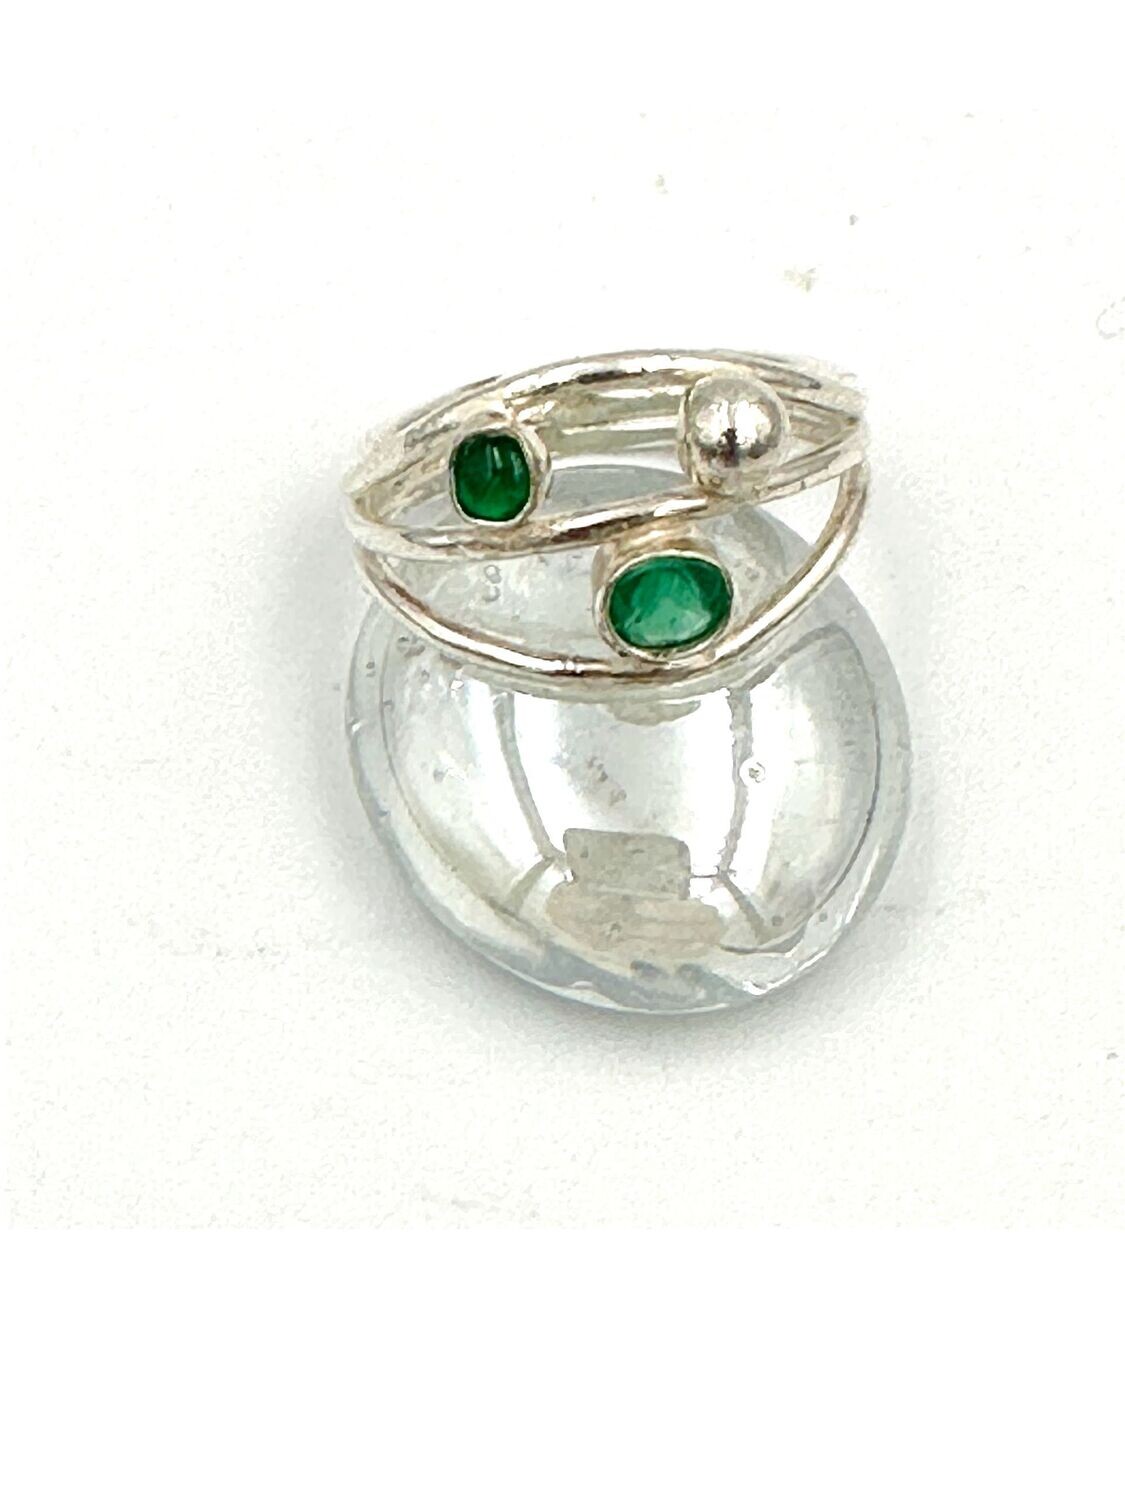 Green Onyx and Cubic Zirconia 3 wire ring